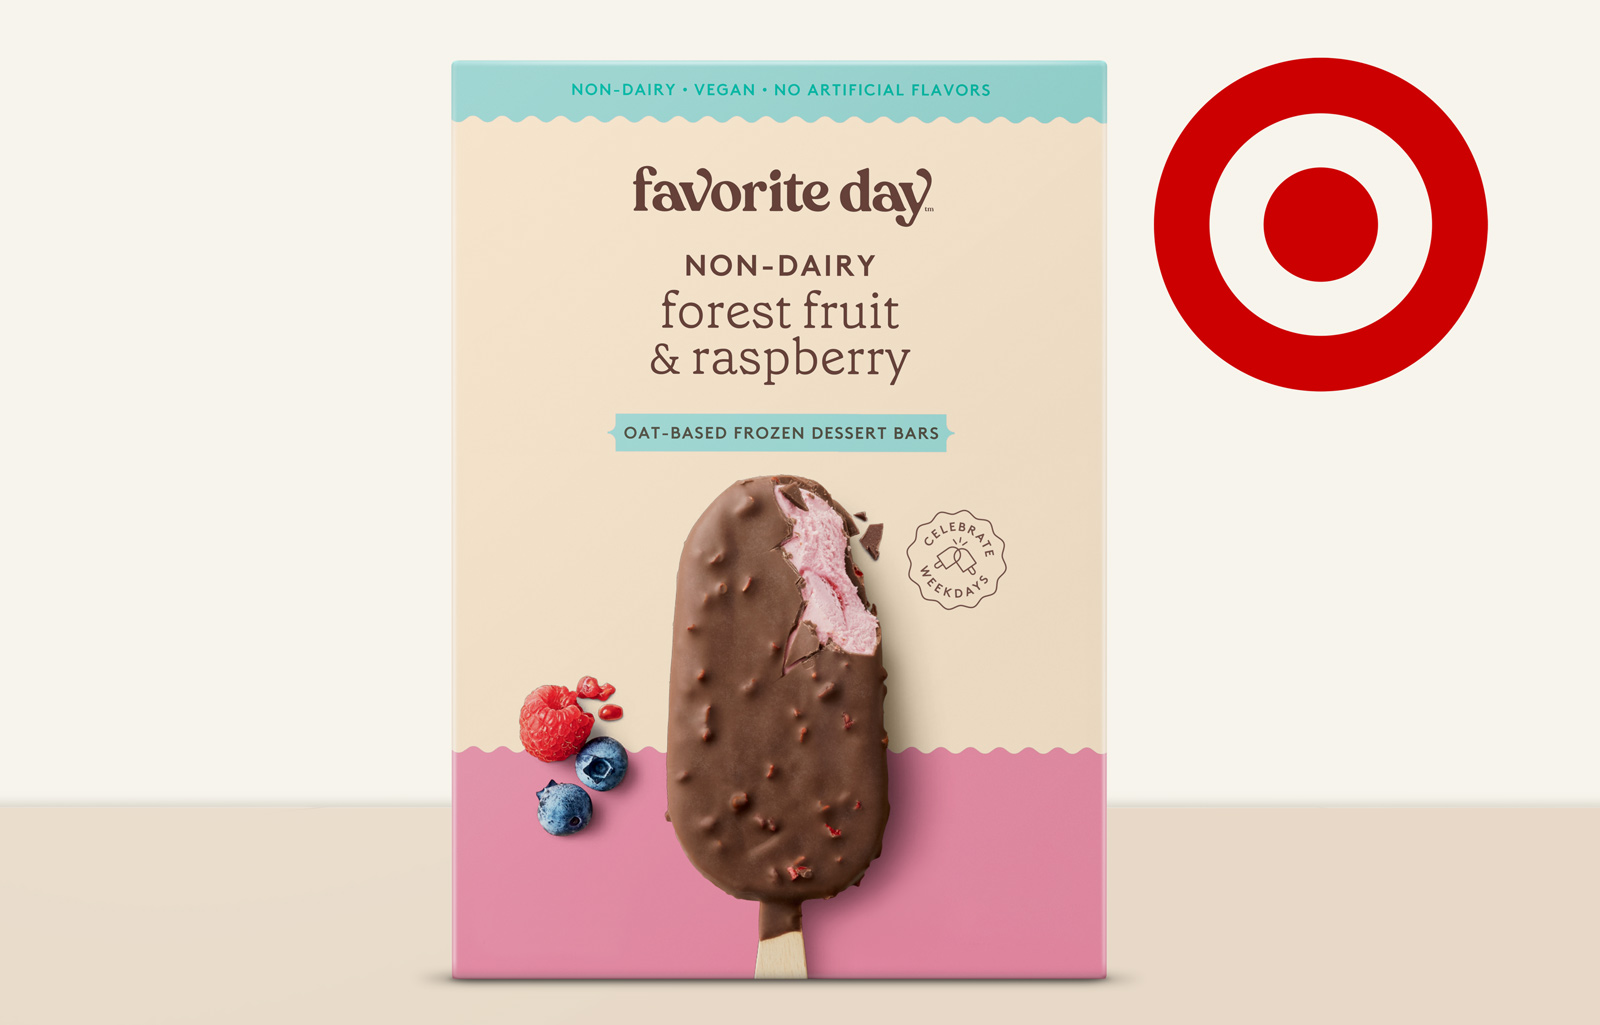 Target Launched Its Own Vegan Food Line and Nearly Everything Is Under